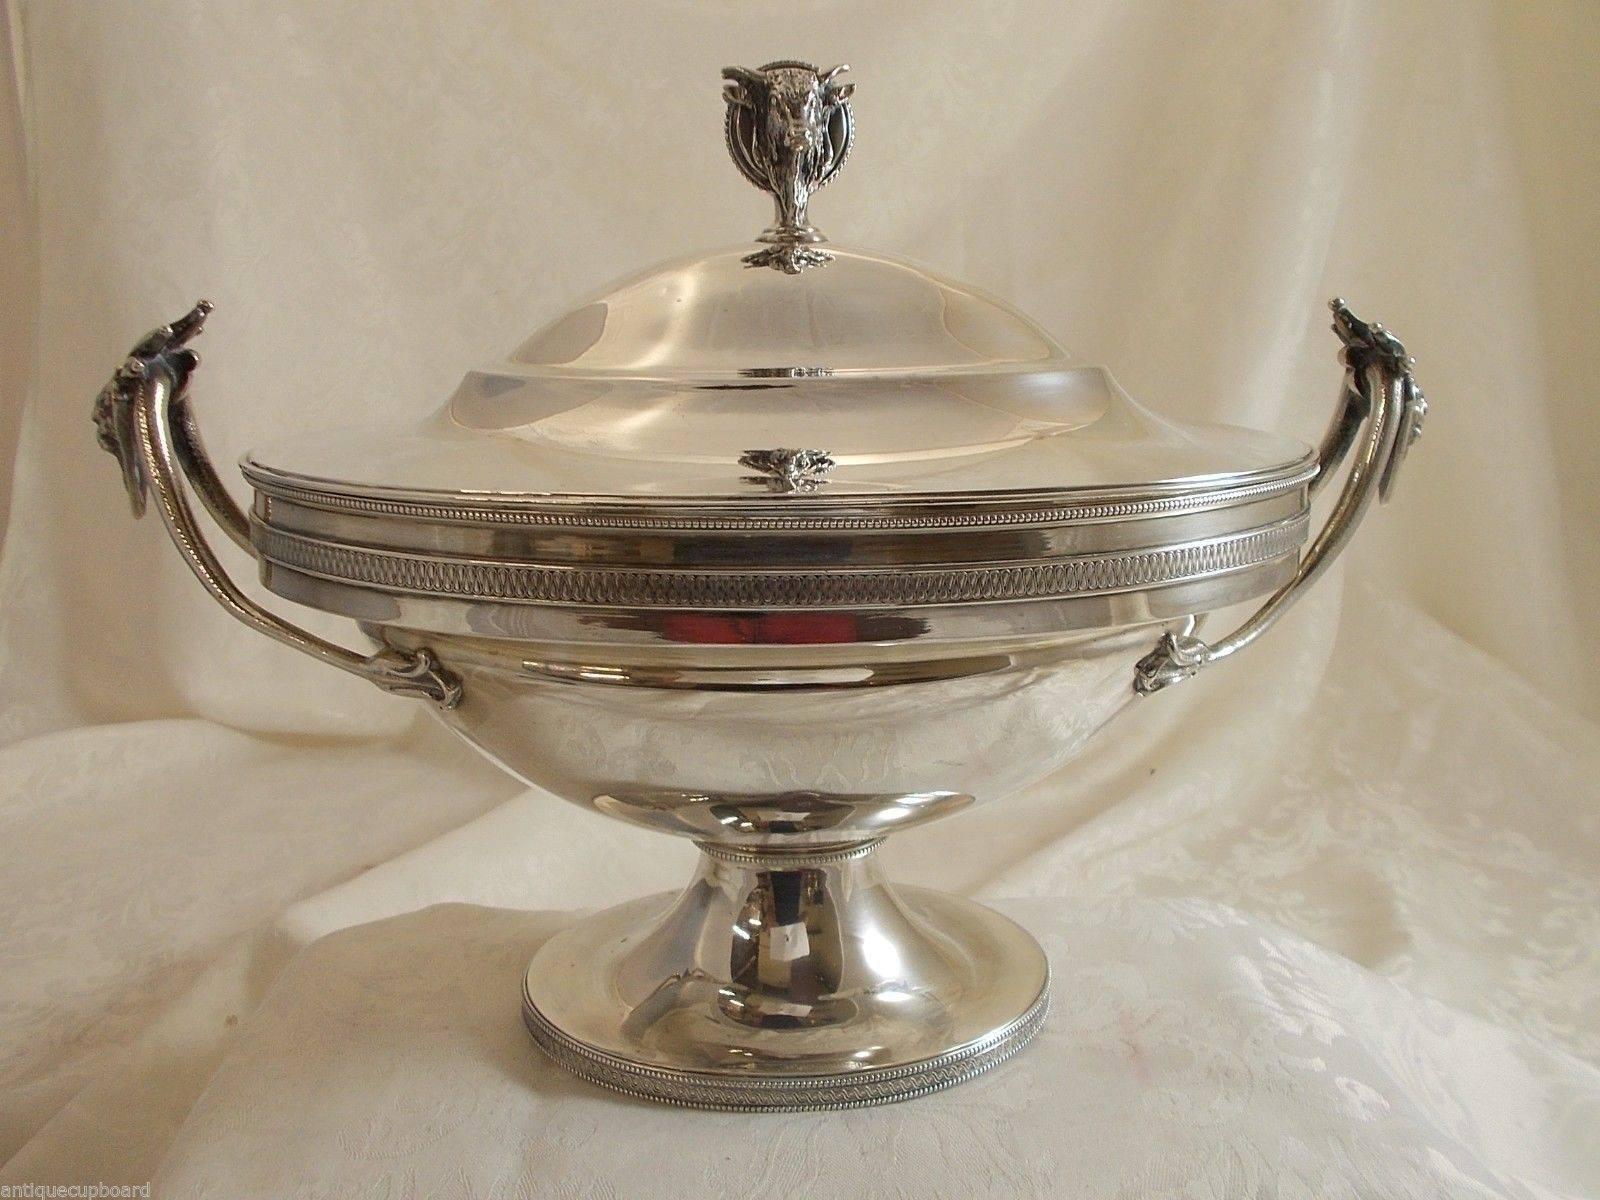 19th Century Gorham Sterling Silver Tureen with 3D Bull Finial Figural Exceptional Hollowware